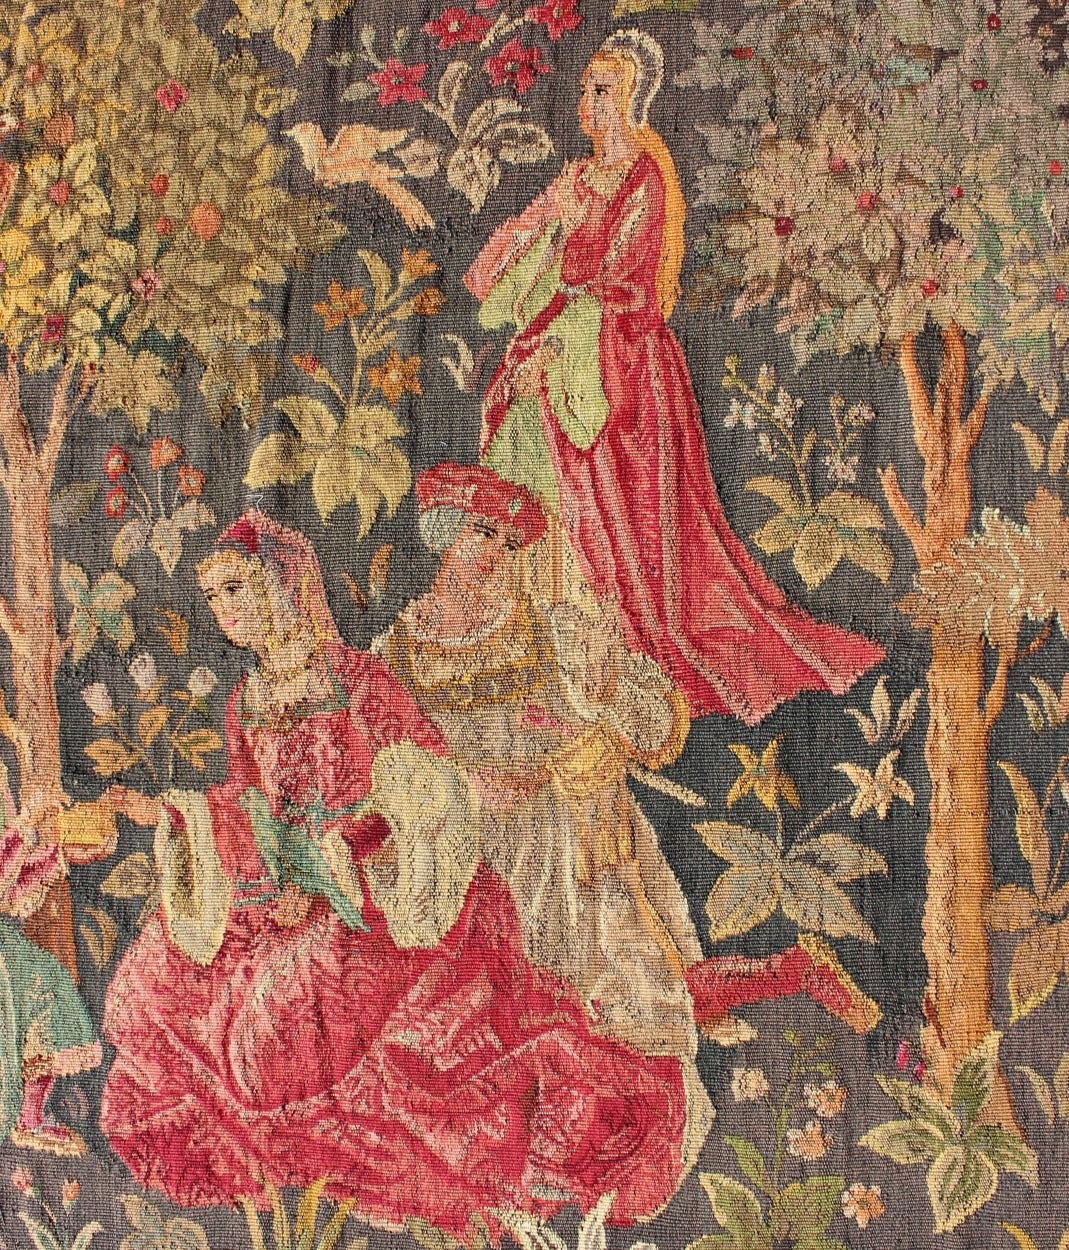 Measures: 4'11 x 7'5.
This Beautiful Scenery design antique French tapestry from the early 1900's features vibrant colors which work off of a medium gray background, depicting a romantic scene amid an orchard.

Antique French tapestry in gray